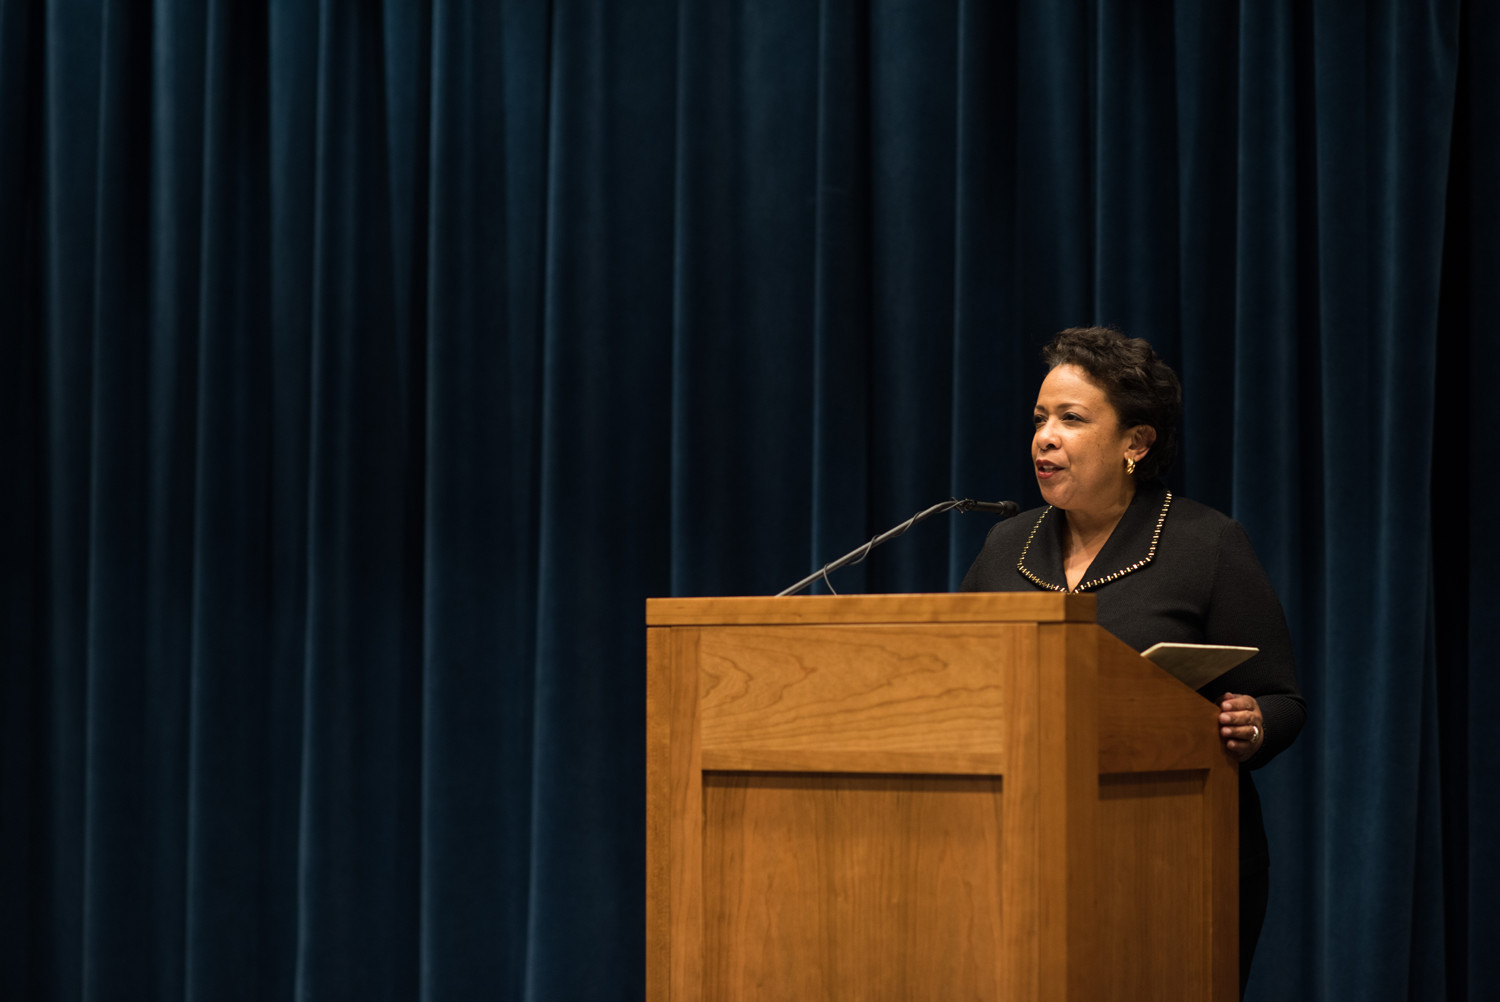 Former Attorney General Loretta Lynch, this year’s recipient of the Thomas Jefferson Foundation Medal in Law, spoke Thursday at the Law School. (Photo by Jesus Pino) 